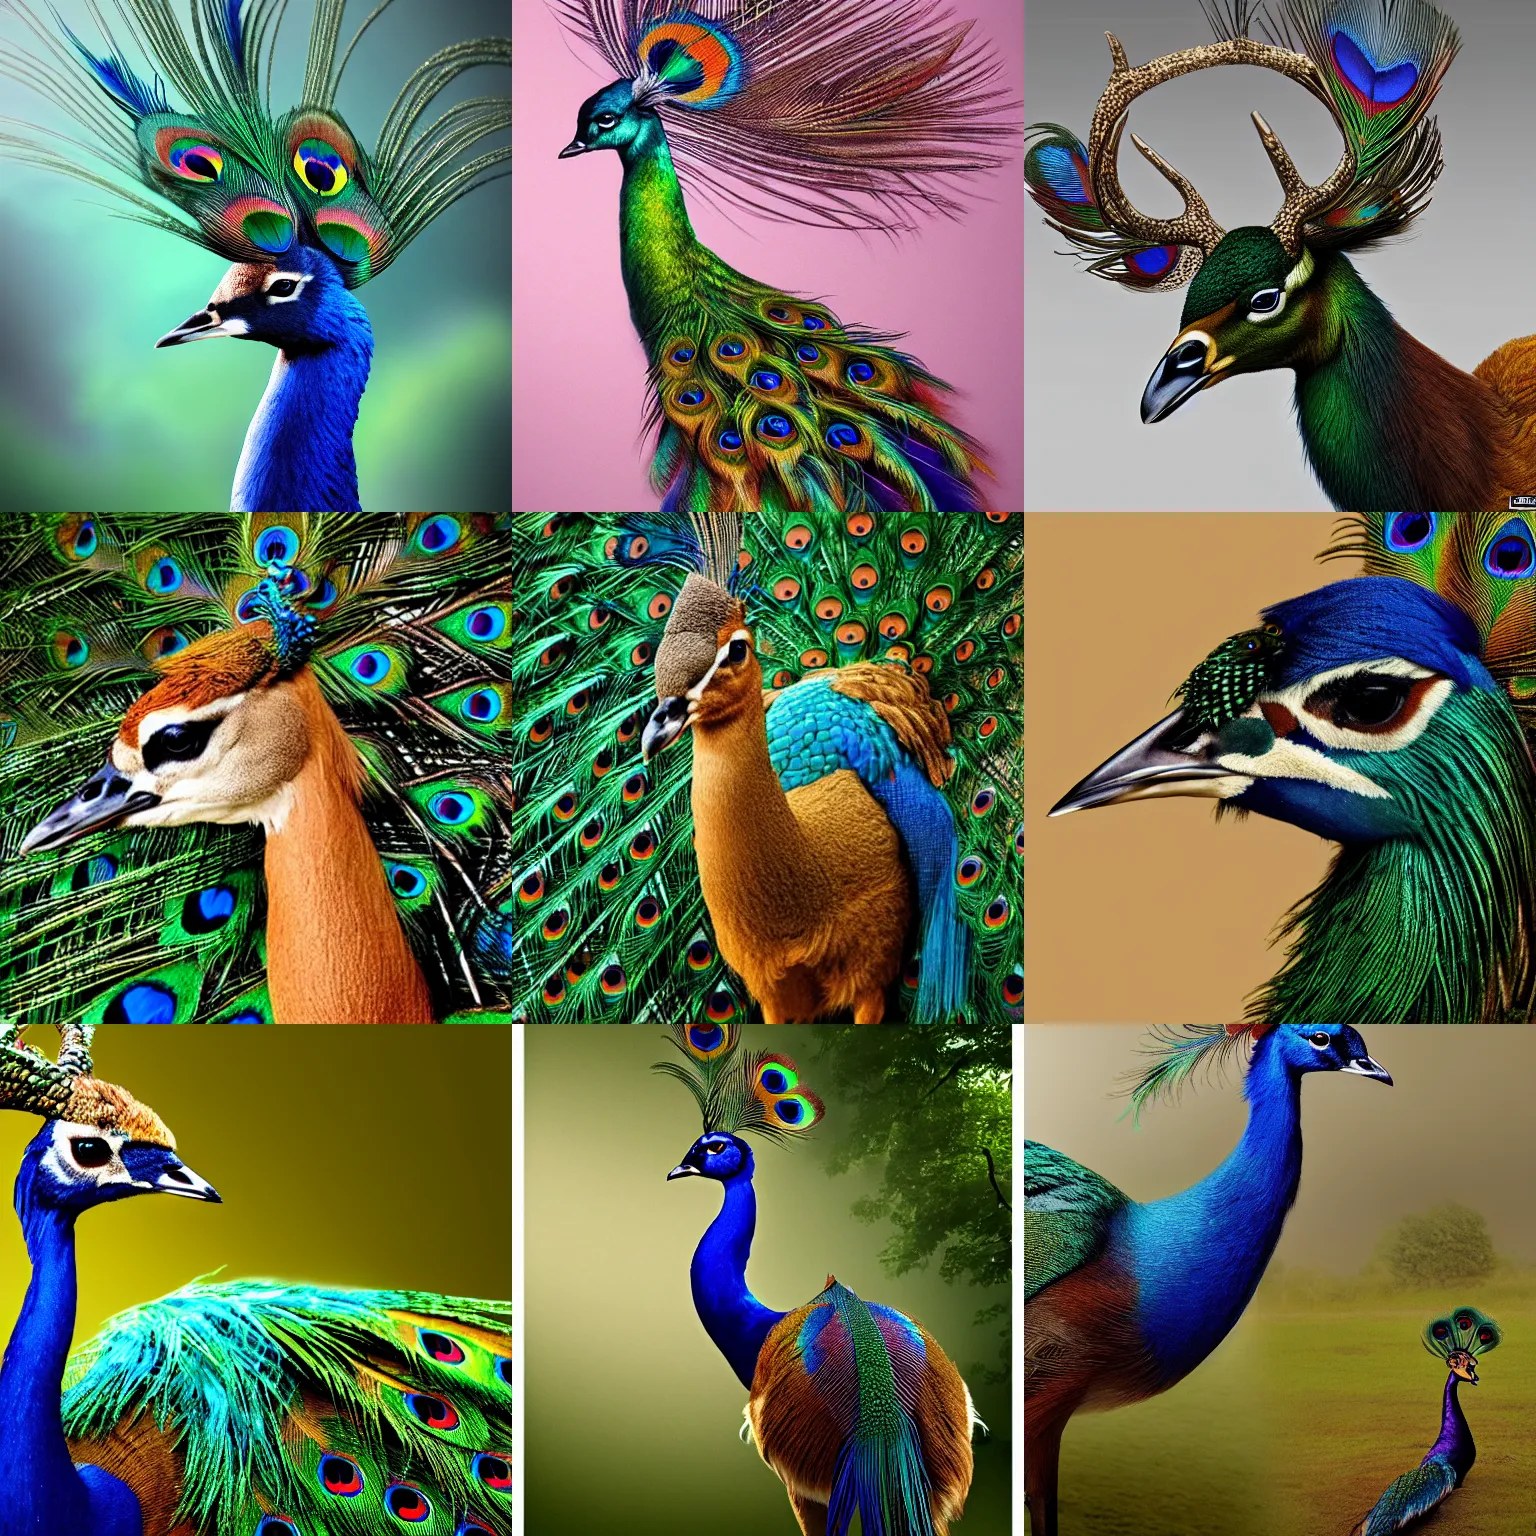 Peacock feathers - Stock Image - F012/2851 - Science Photo Library